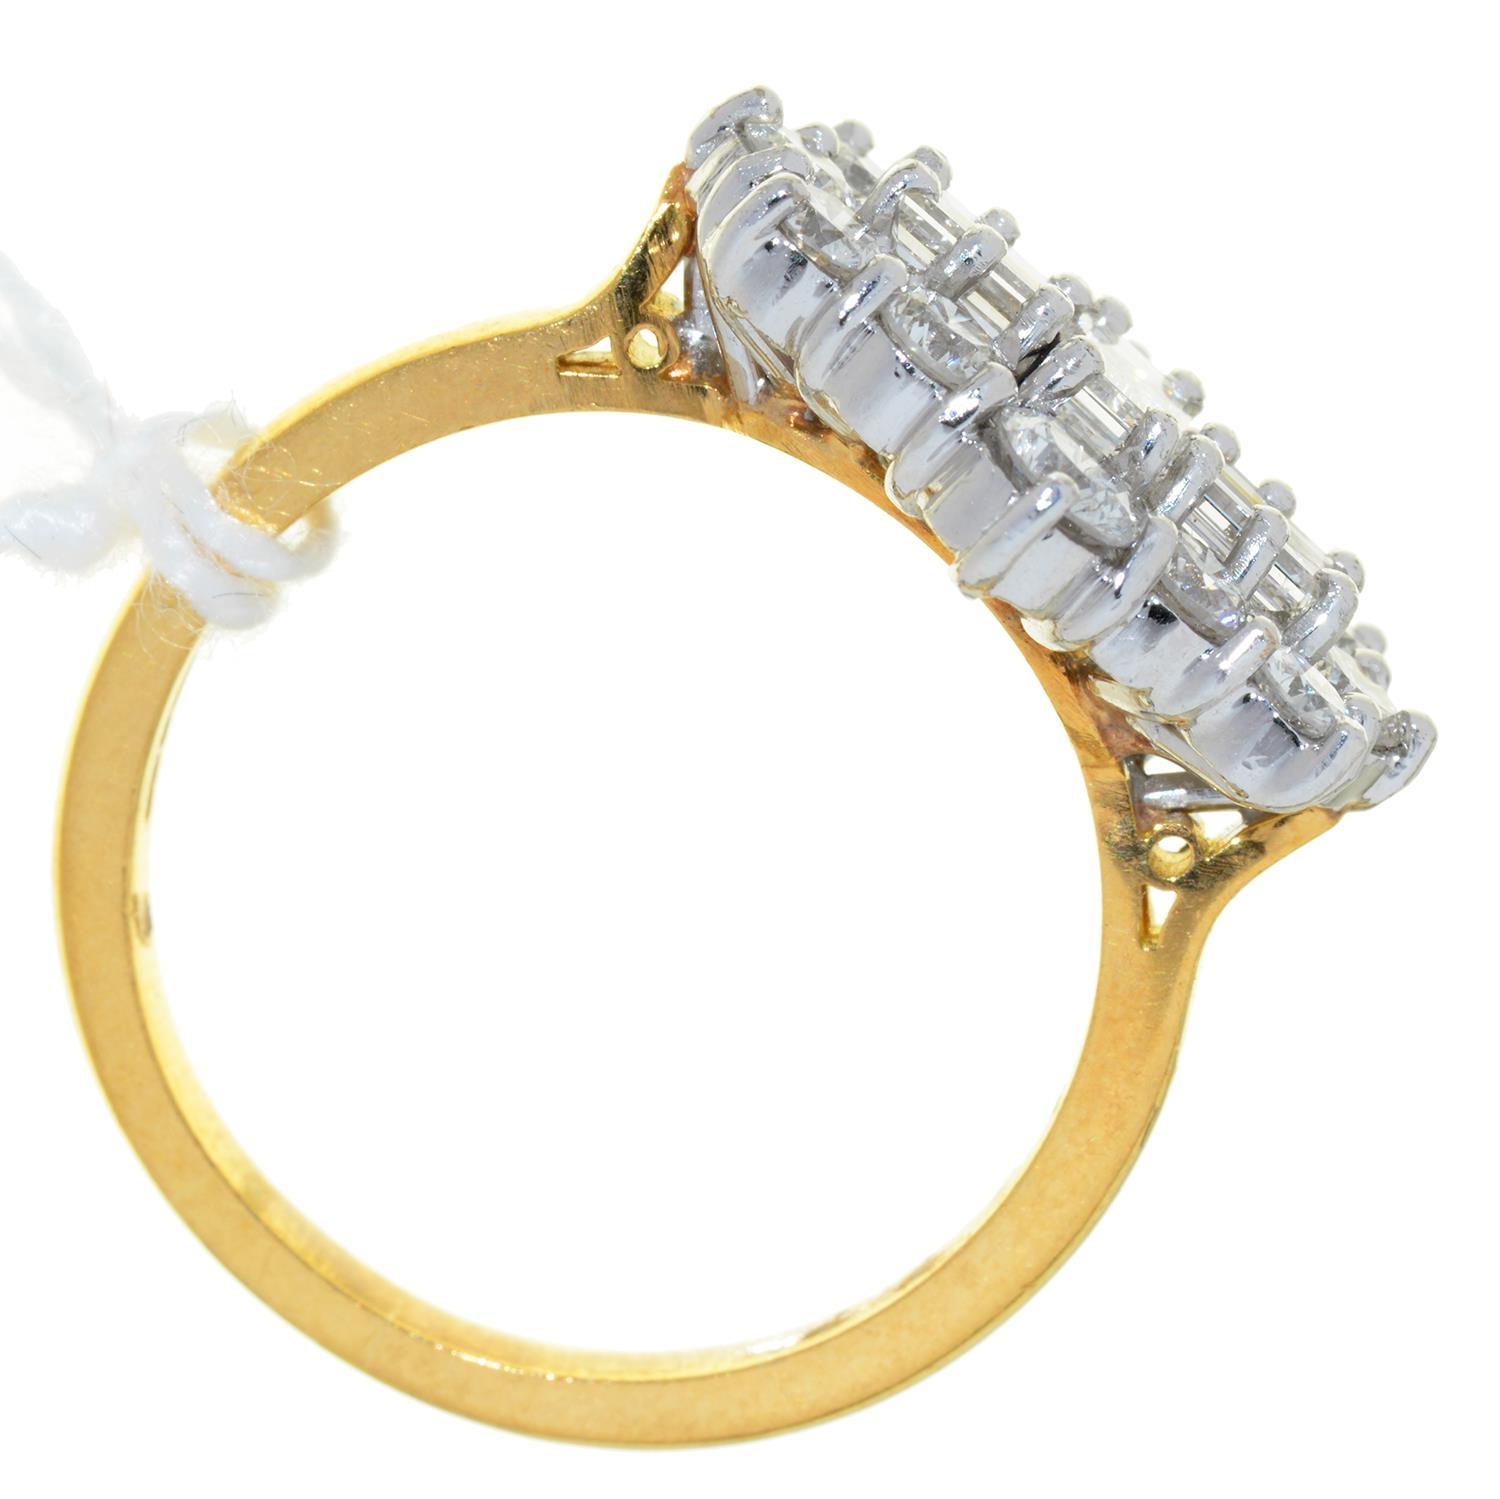 A DIAMOND CLUSTER RING WITH THREE LARGER CENTRAL EMERALD CUT DIAMONDS, IN 18CT GOLD, LONDON 2001, - Image 2 of 2